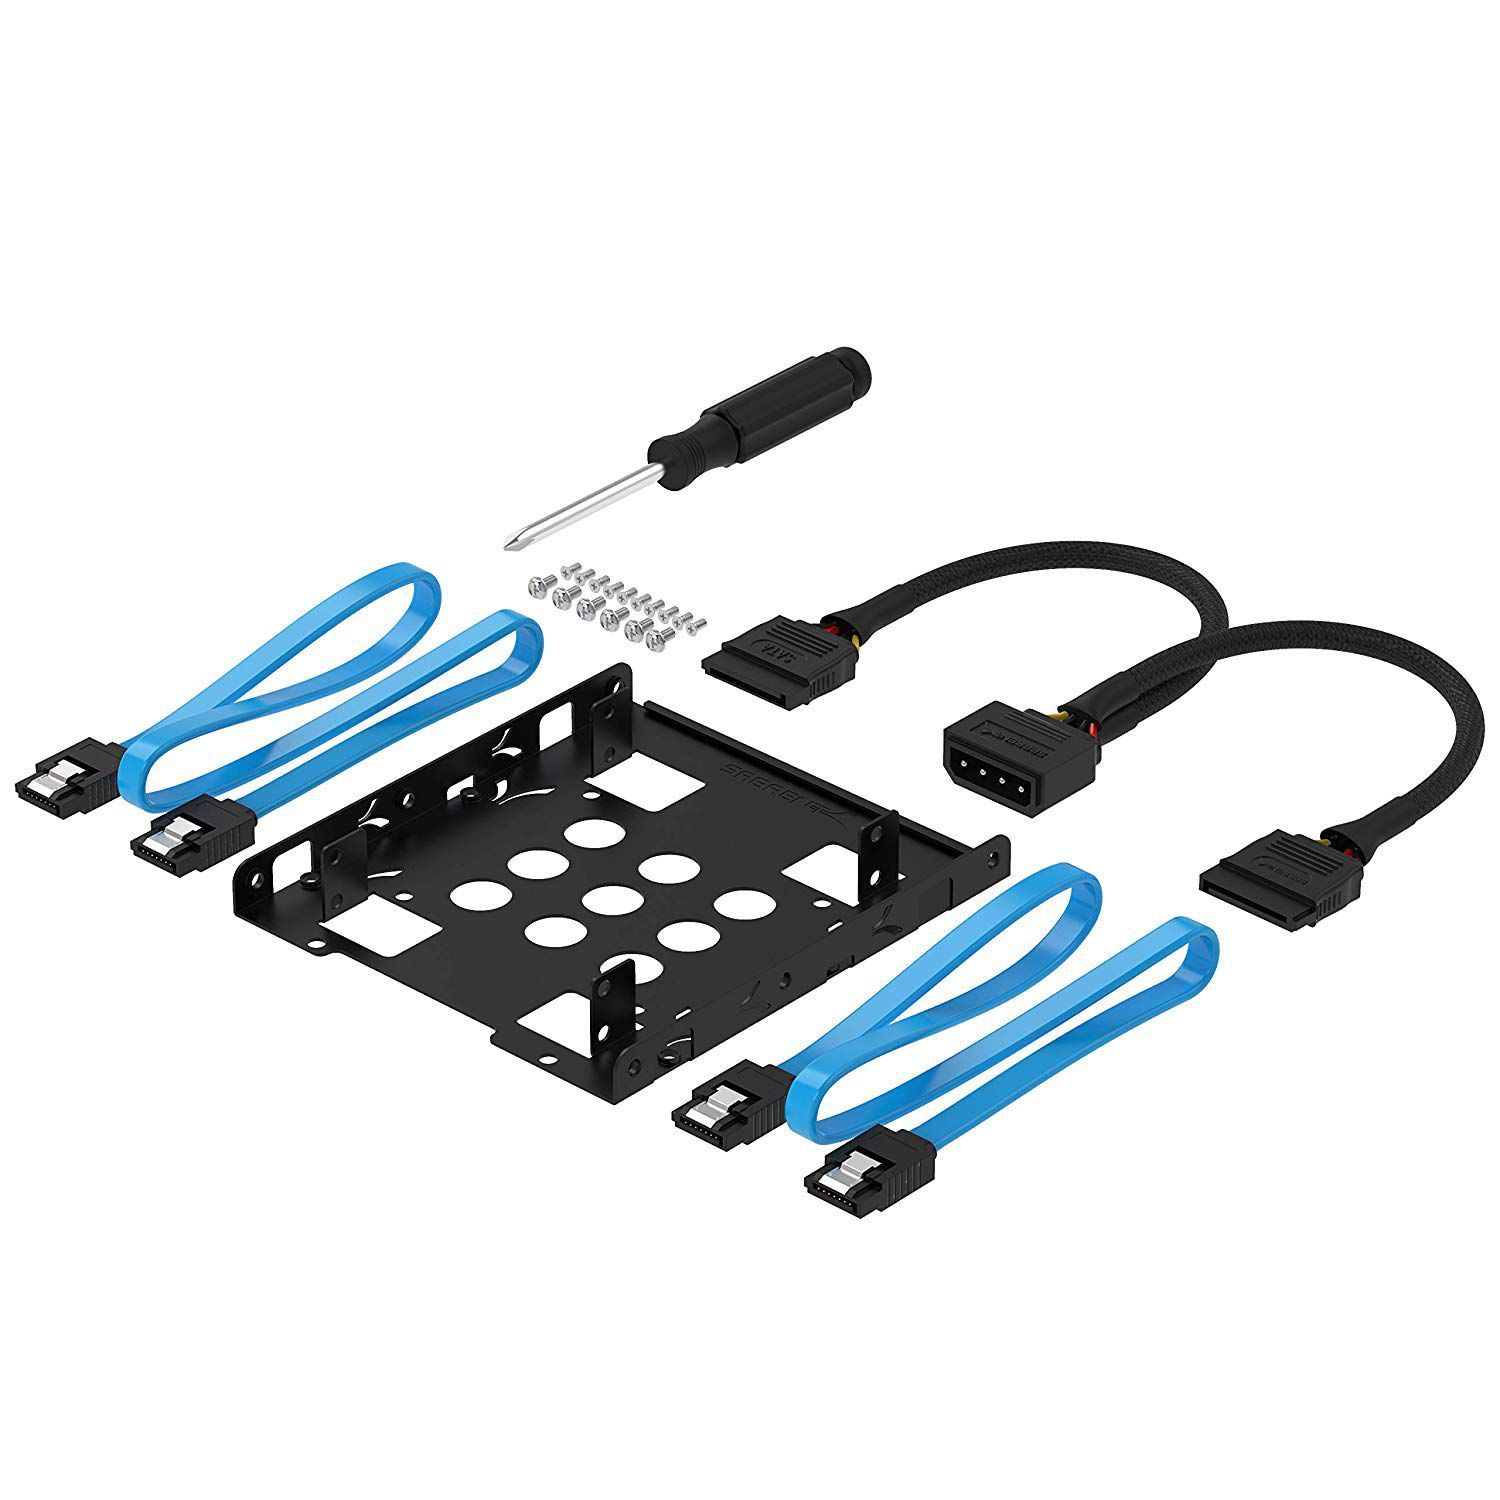 Sabrent 3.5-Inch to x2 SSD 2.5-Inch Internal Hard Drive Mounting Kit [SATA and Power Cables included] BK-HDCC